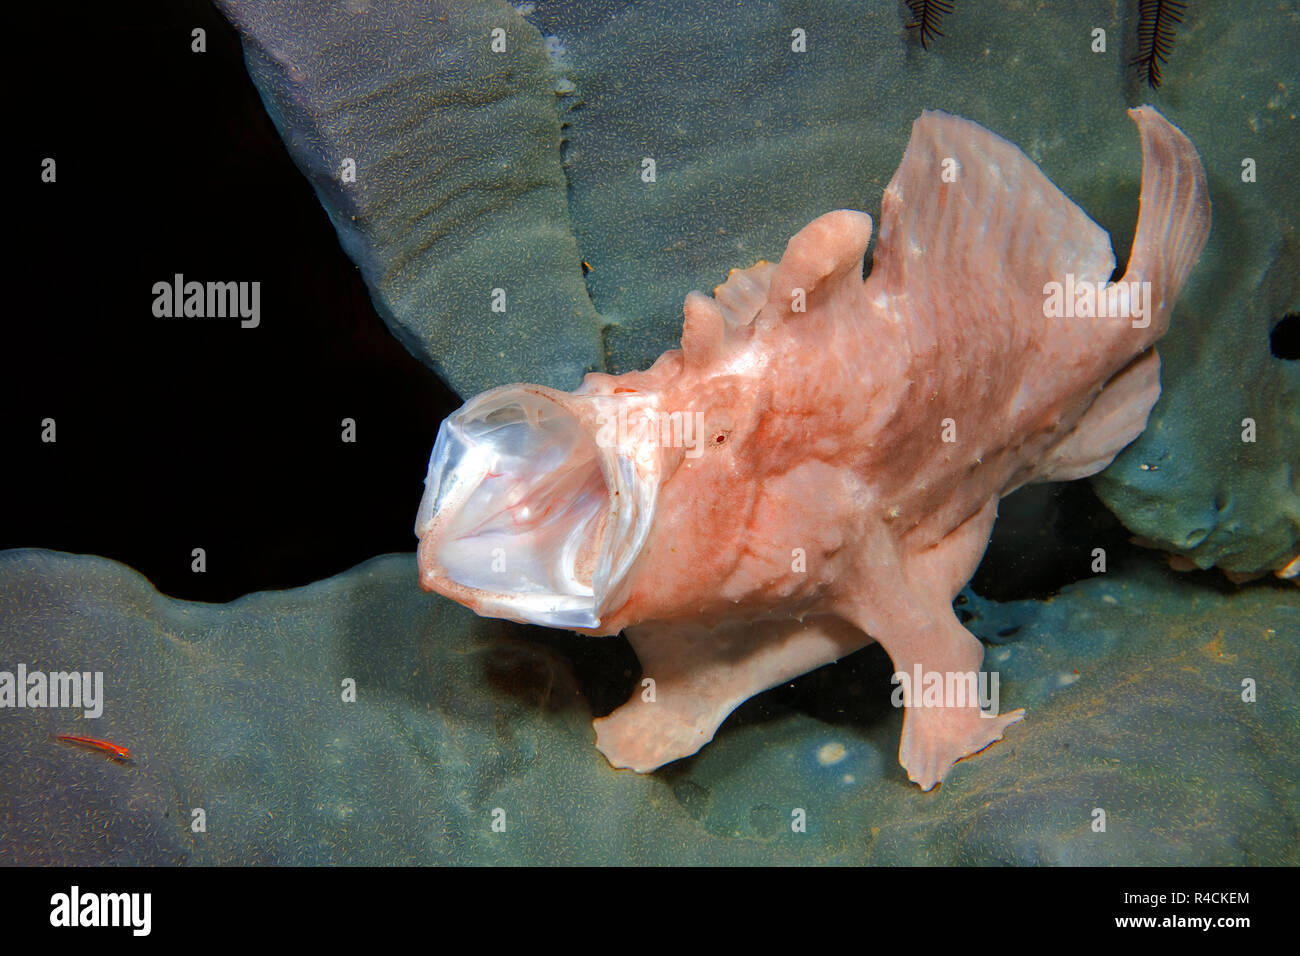 Giant Frogfish, Commerson's Anglerfish or Commerson's Frogfish (Antennarius commersoni), open mouth, Camiguin, Mindanao, Philippines Stock Photo